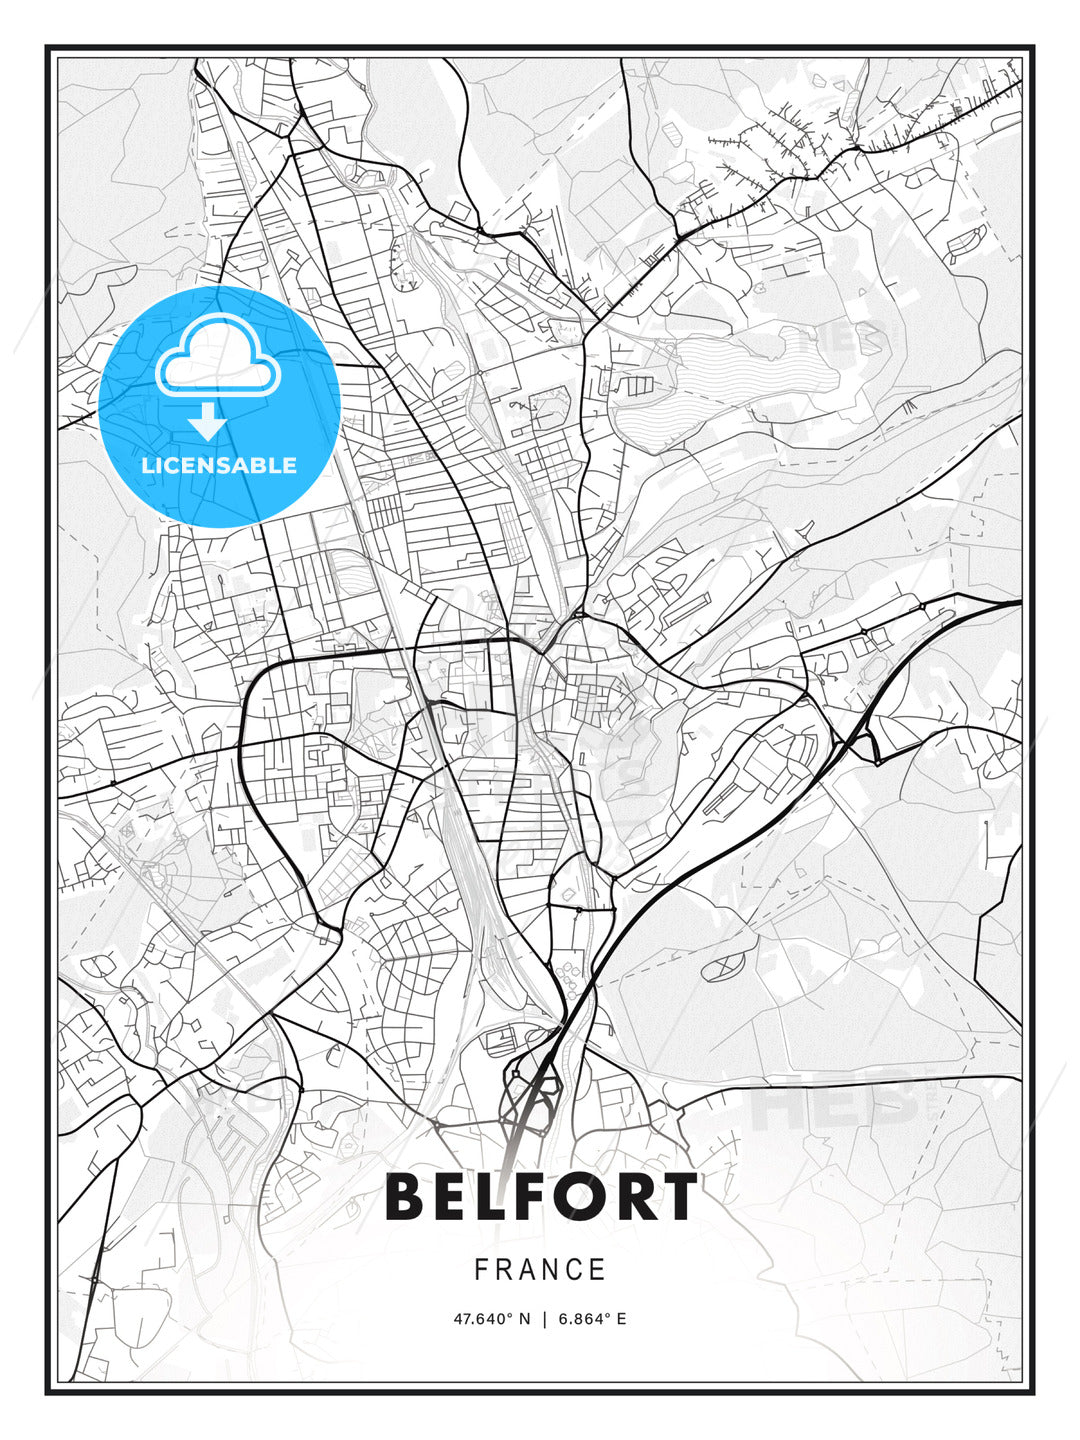 Belfort, France, Modern Print Template in Various Formats - HEBSTREITS Sketches